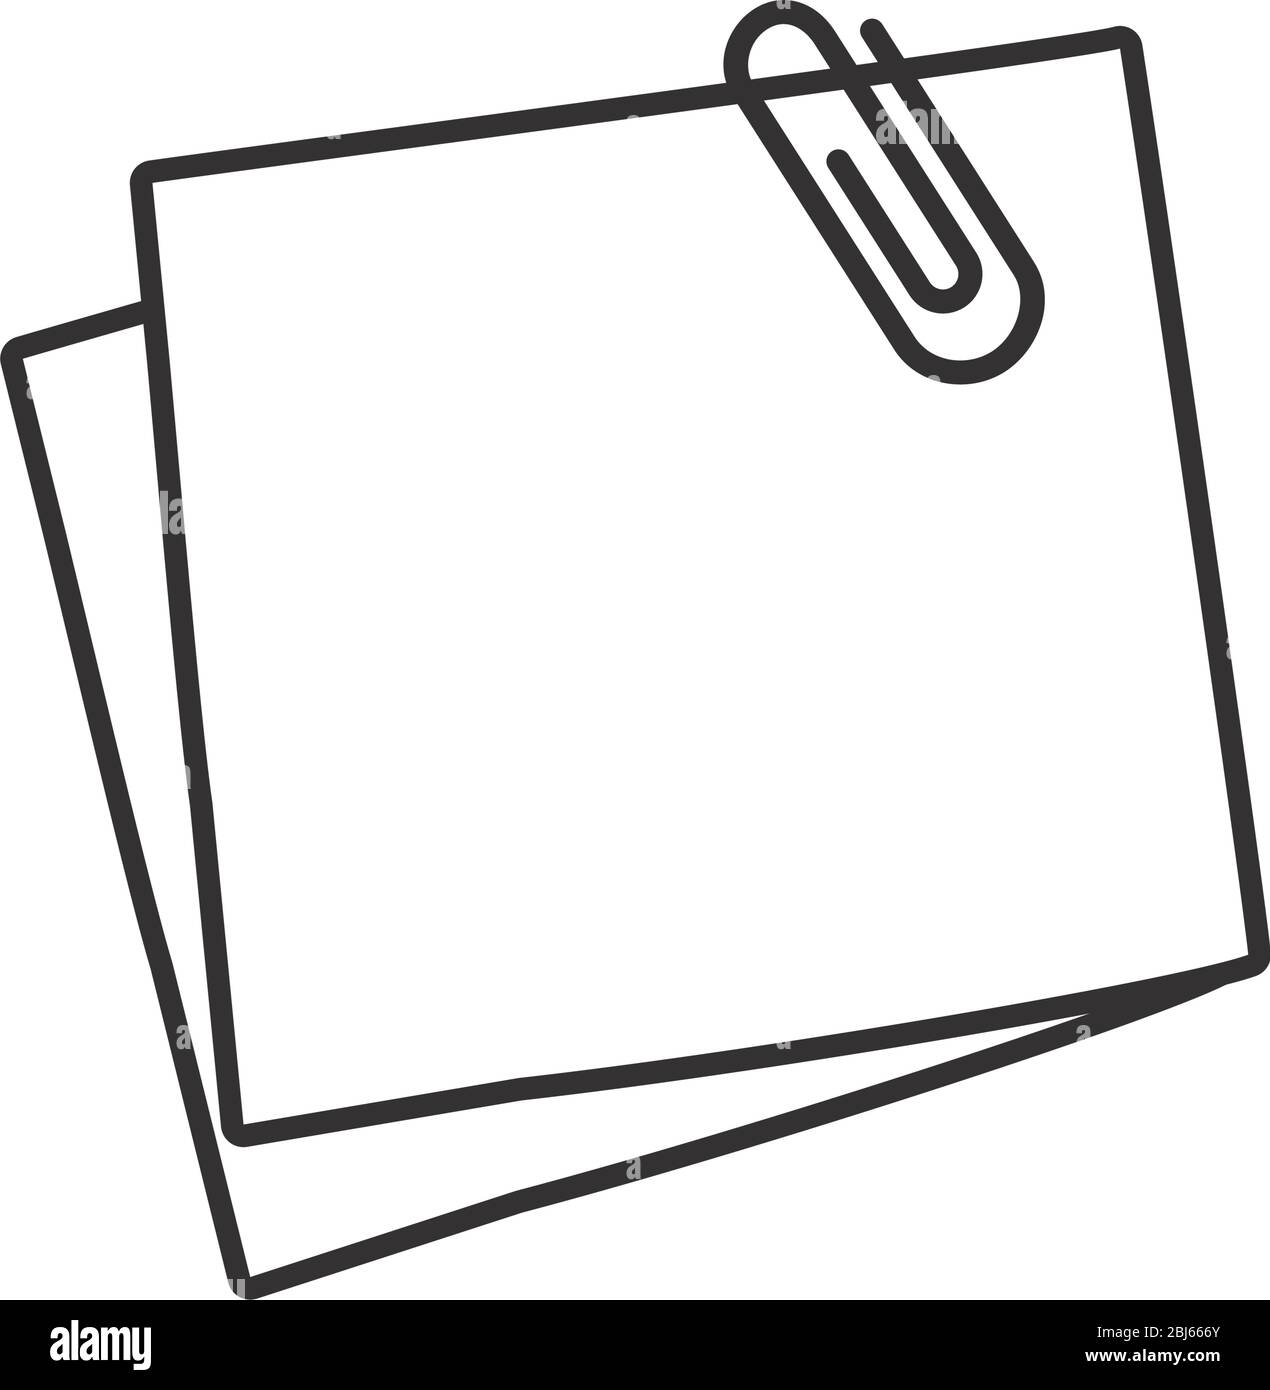 Sticky notes Black and White Stock Photos & Images - Alamy